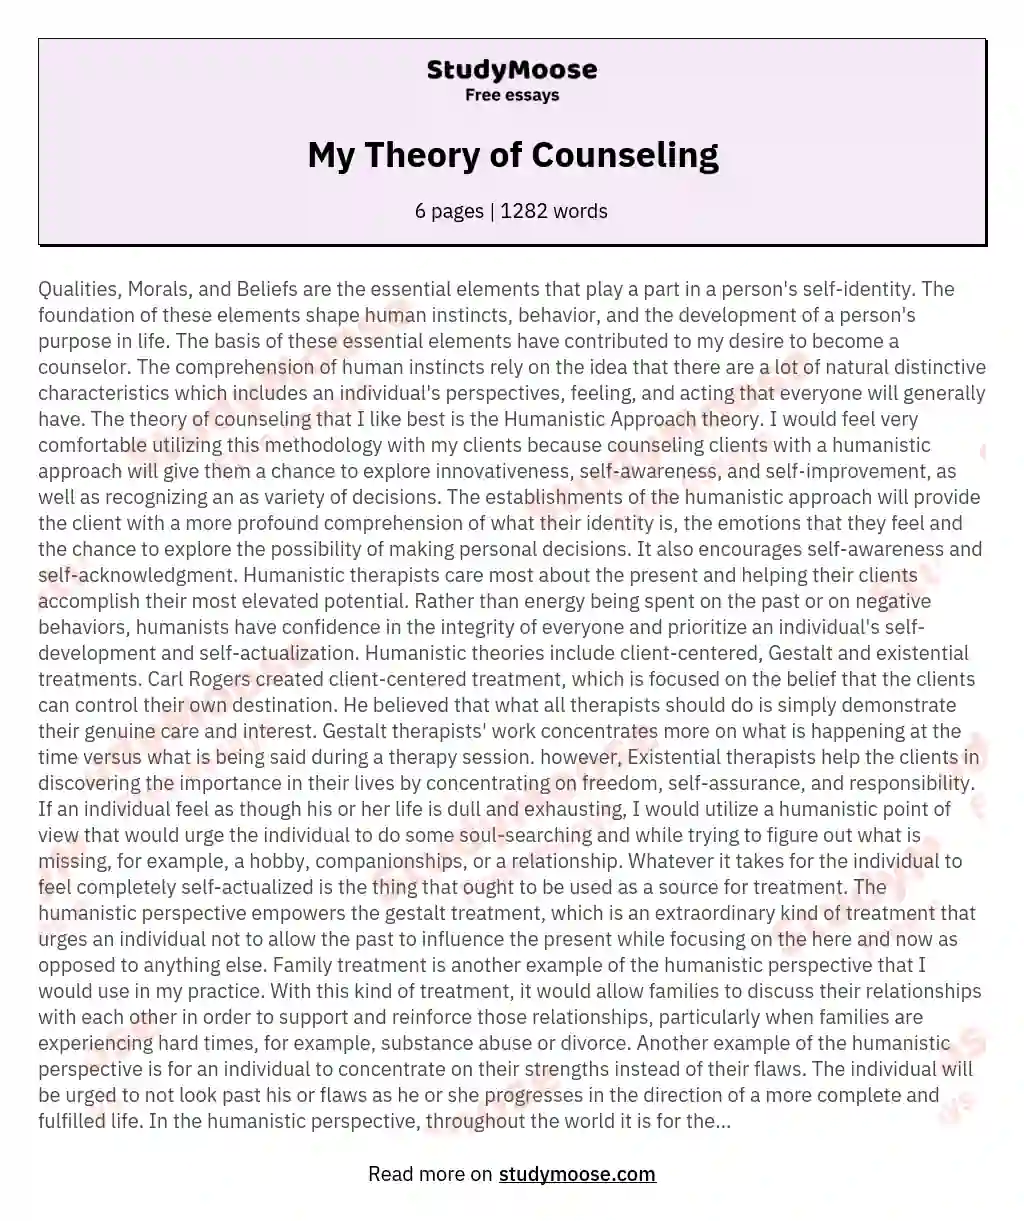 My Theory of Counseling